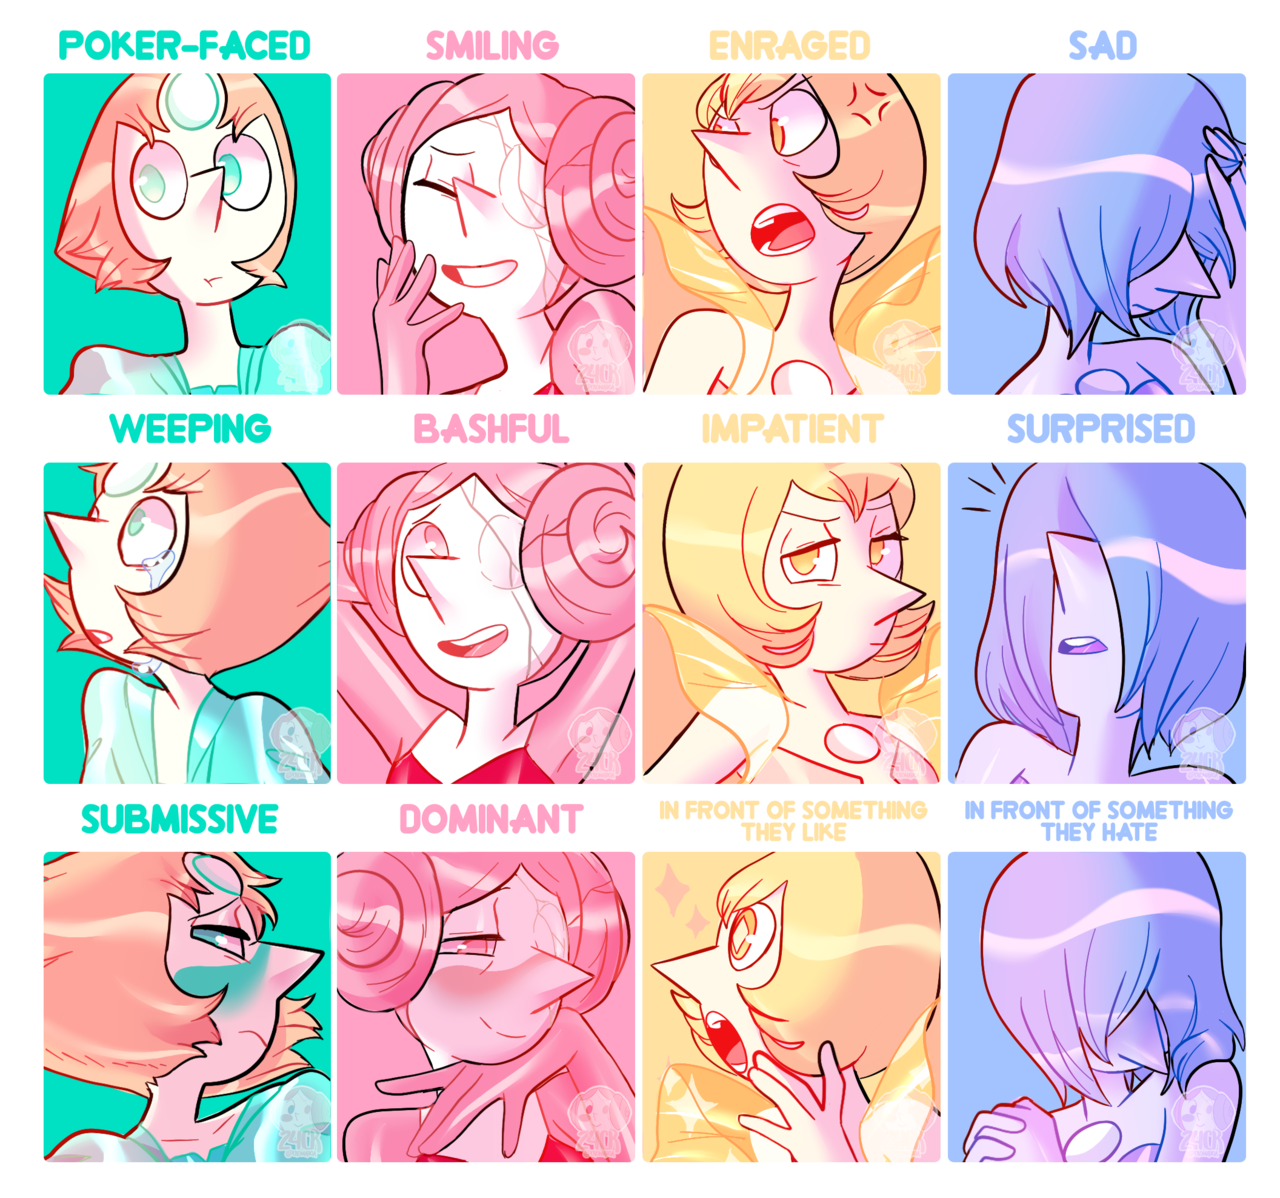 redid that expression meme with the whole squad! now you can appreciate Pink Pearl and Pearl’s expressions, haha.